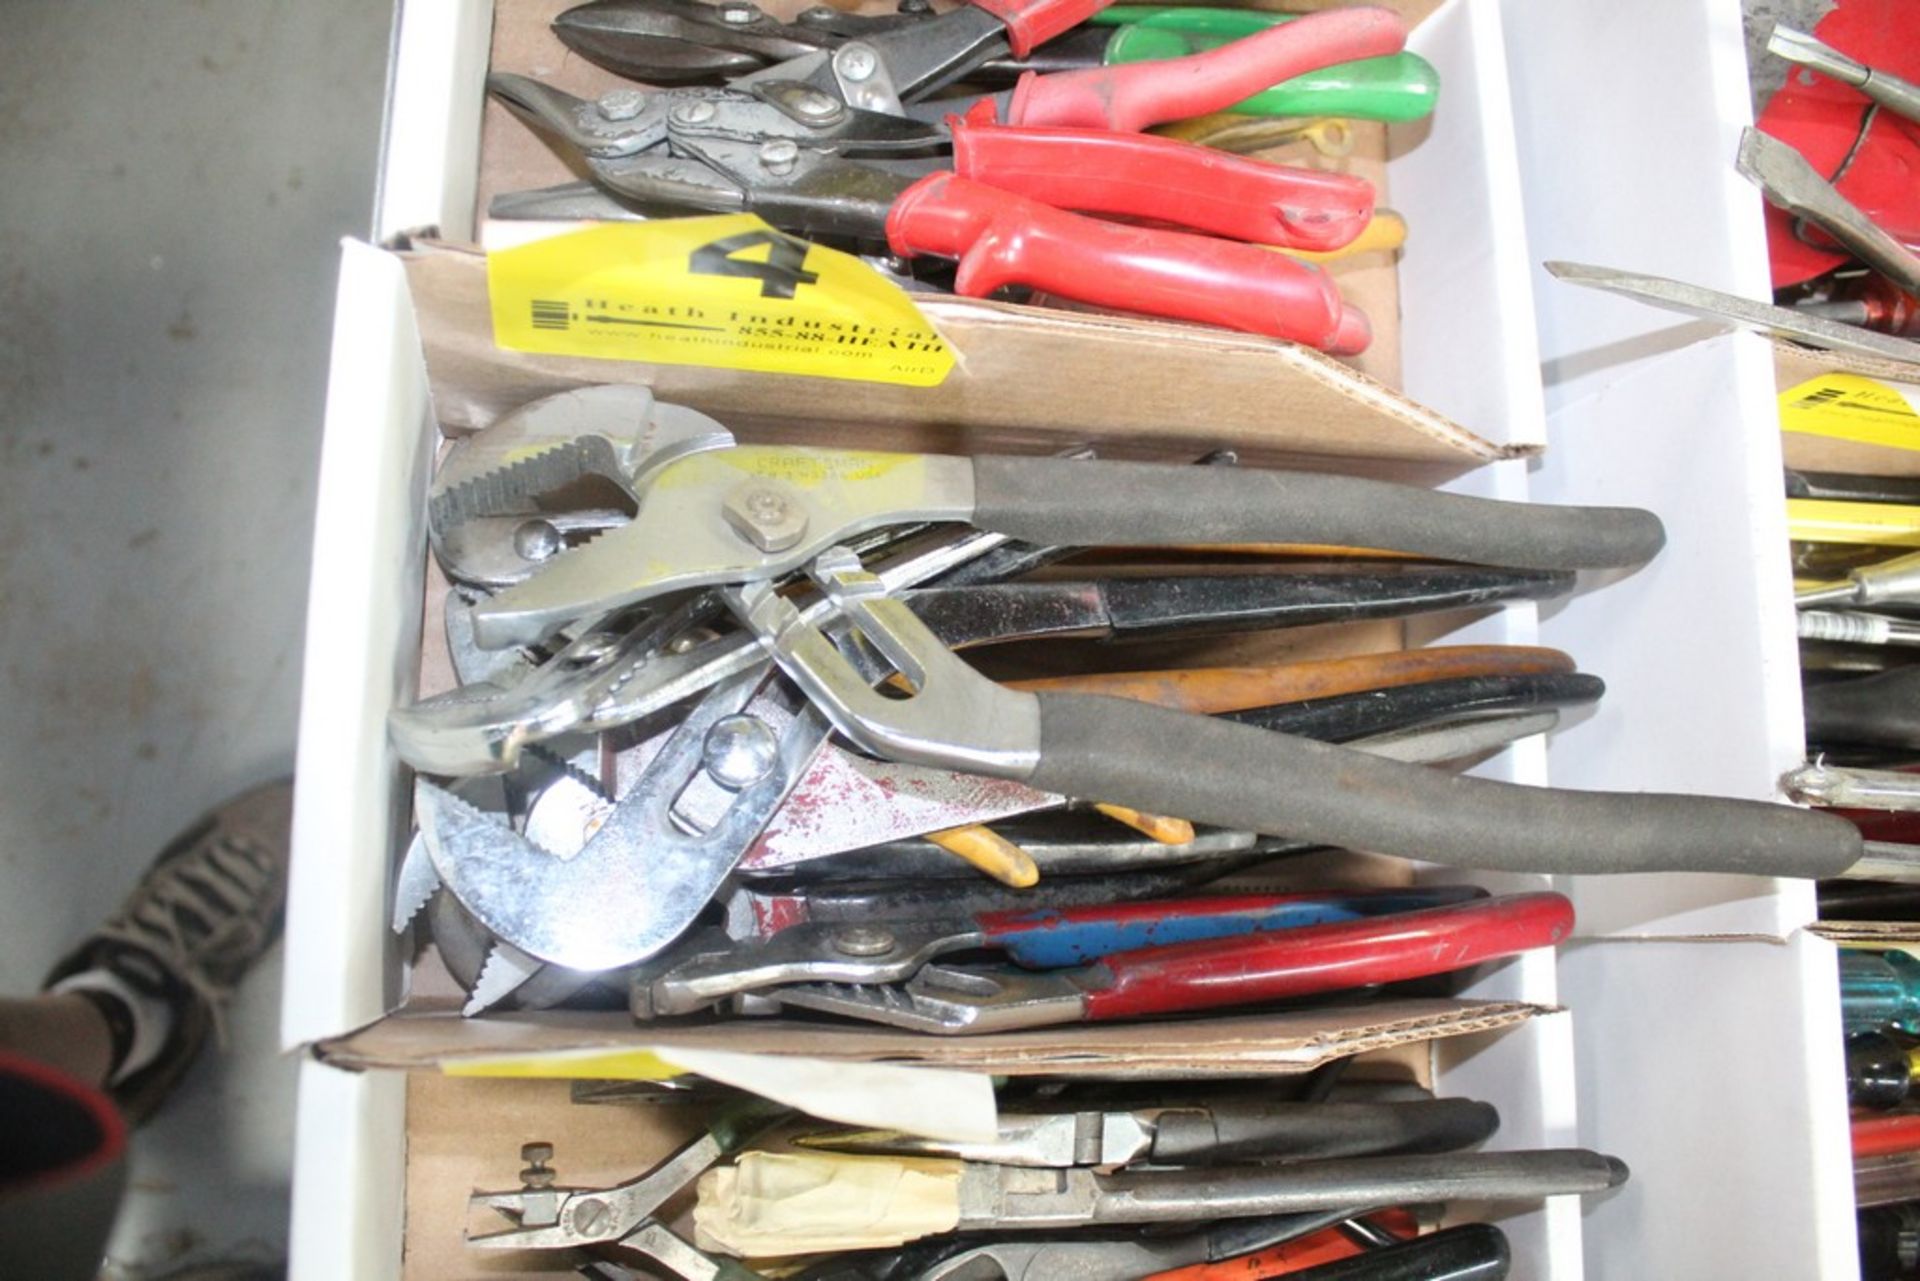 LARGE QUANTITY OF CHANNEL LOCK PLIERS